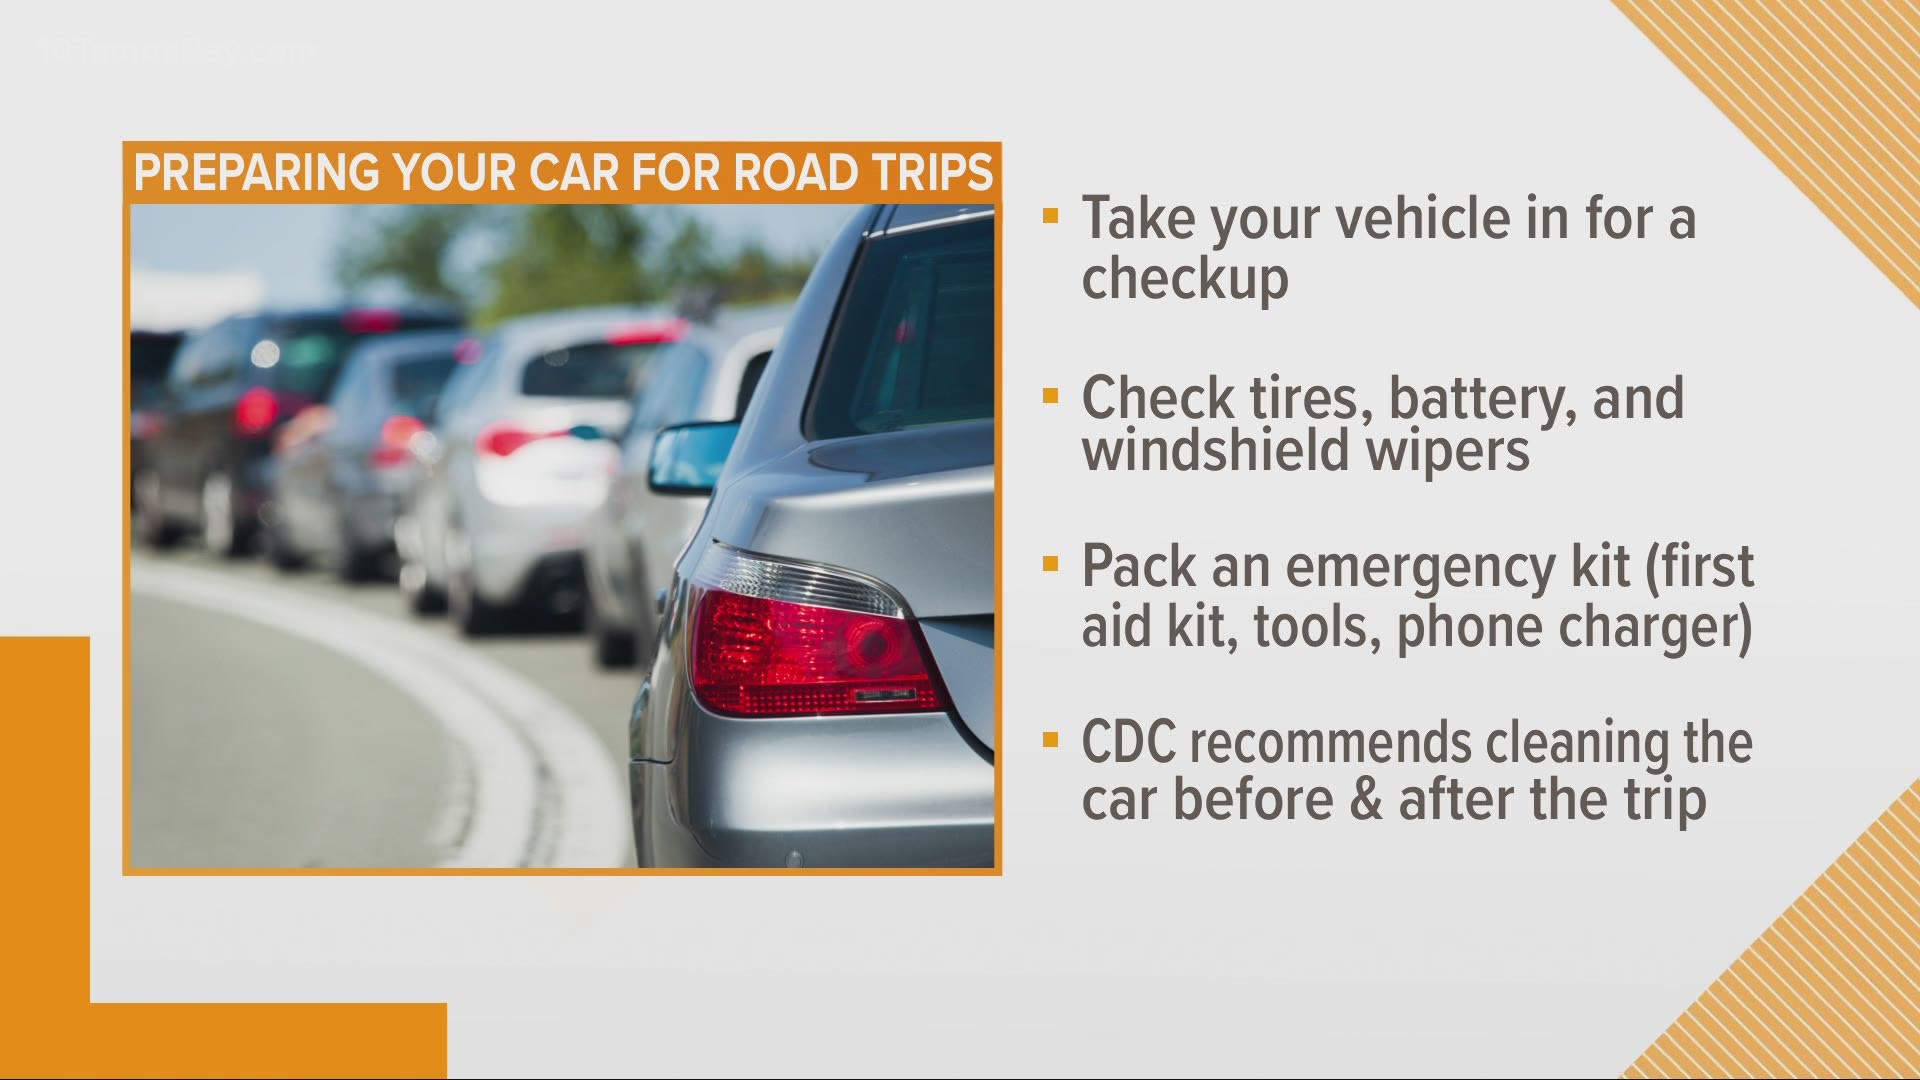 Before you hit the road, make sure your car is ready to go.